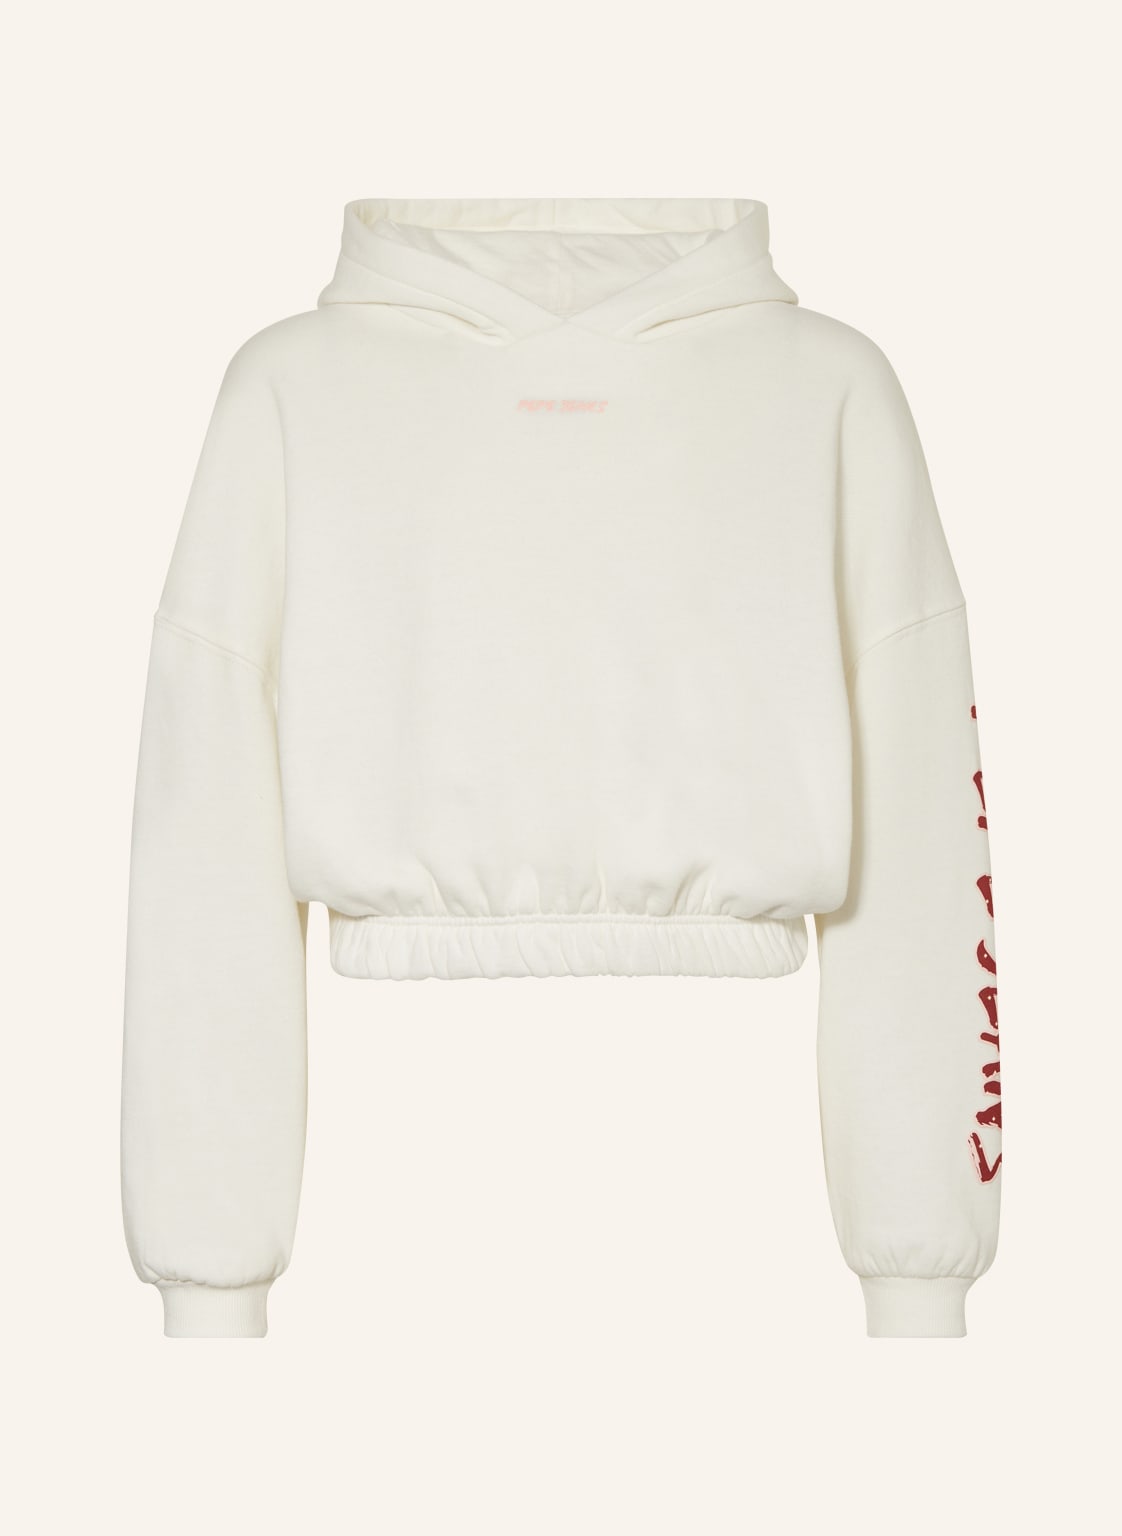 Pepe Jeans Hoodie weiss von Pepe Jeans